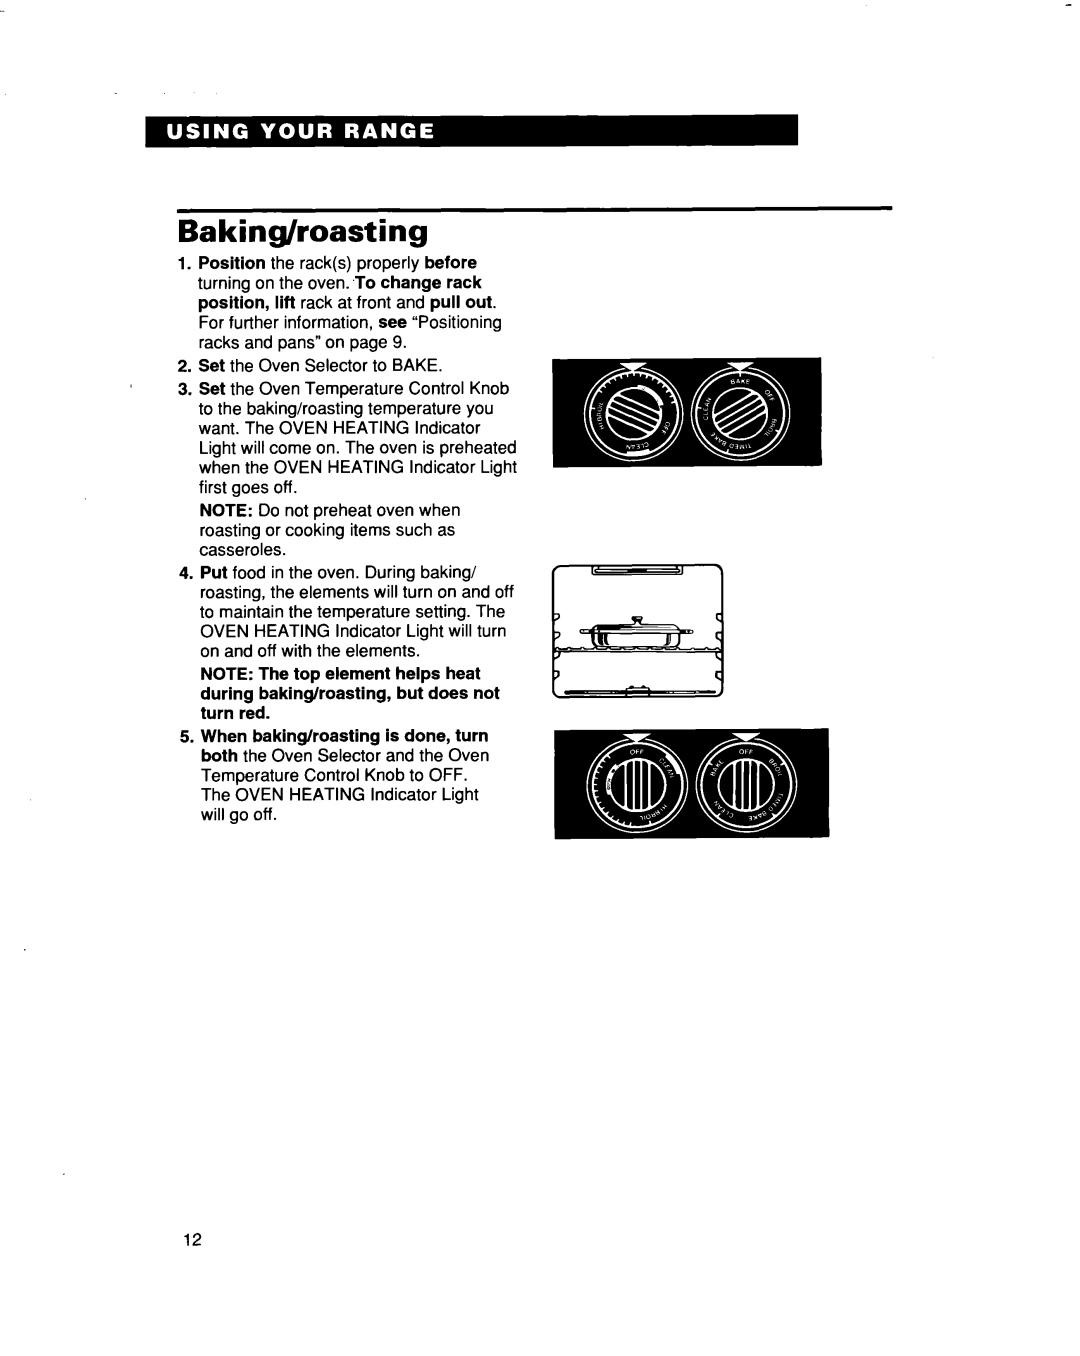 Whirlpool FES364B manual Baking/roasting, NOTE The top element helps heat, during baking/roasting, but does not, turn red 